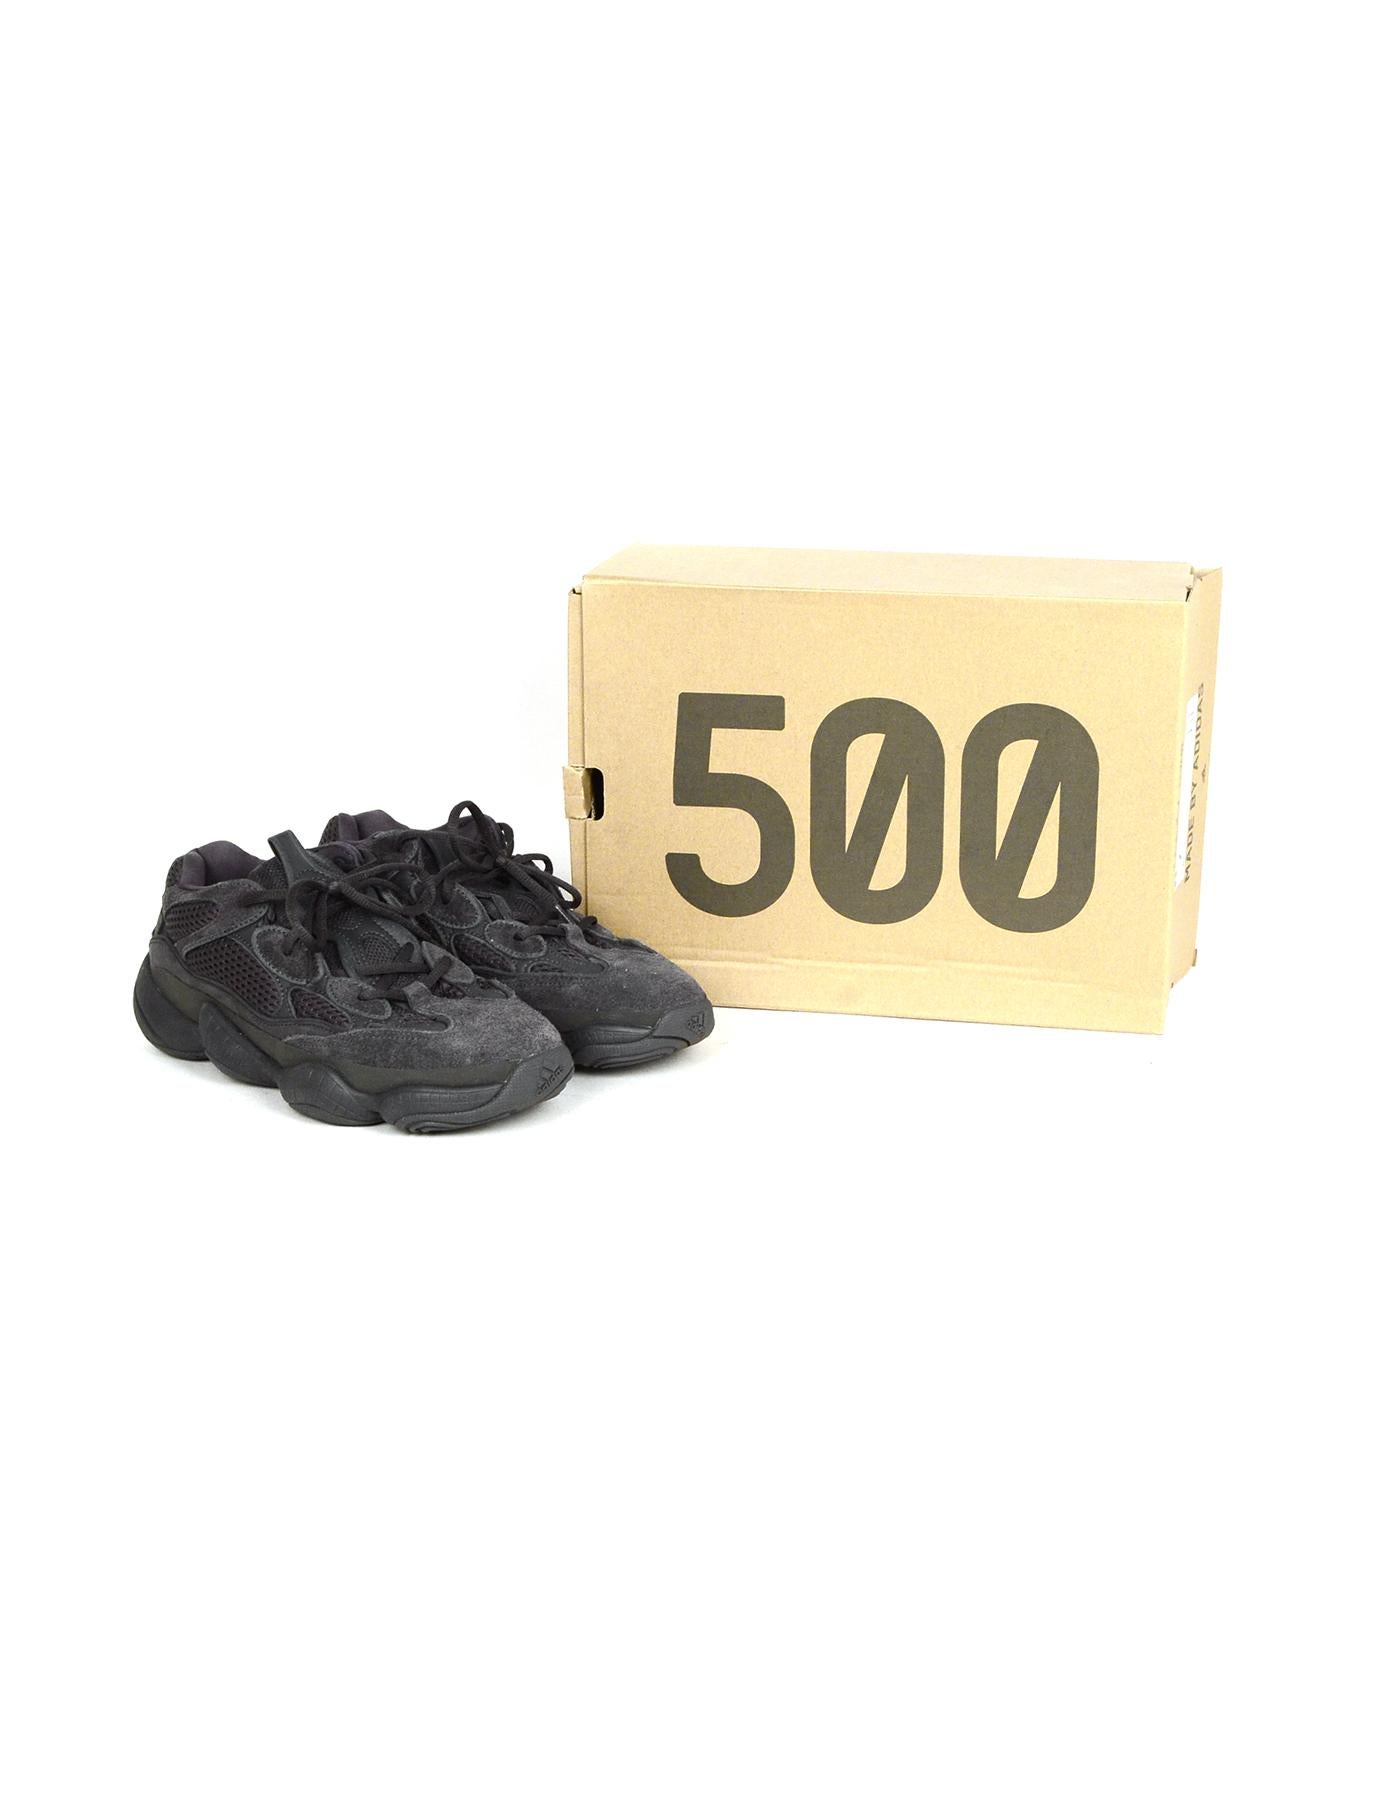 Adidas x Yeezy Unisex 2018 500 Desert Rat Utility Black Sneakers Sz Men's 7, Women's 8.5 In Box

Made In: China
Year of Production: 2018
Color: Black
Materials: Suede, mesh, leather, rubber
Closure/Opening: Lace up
Overall Condition: Excellent